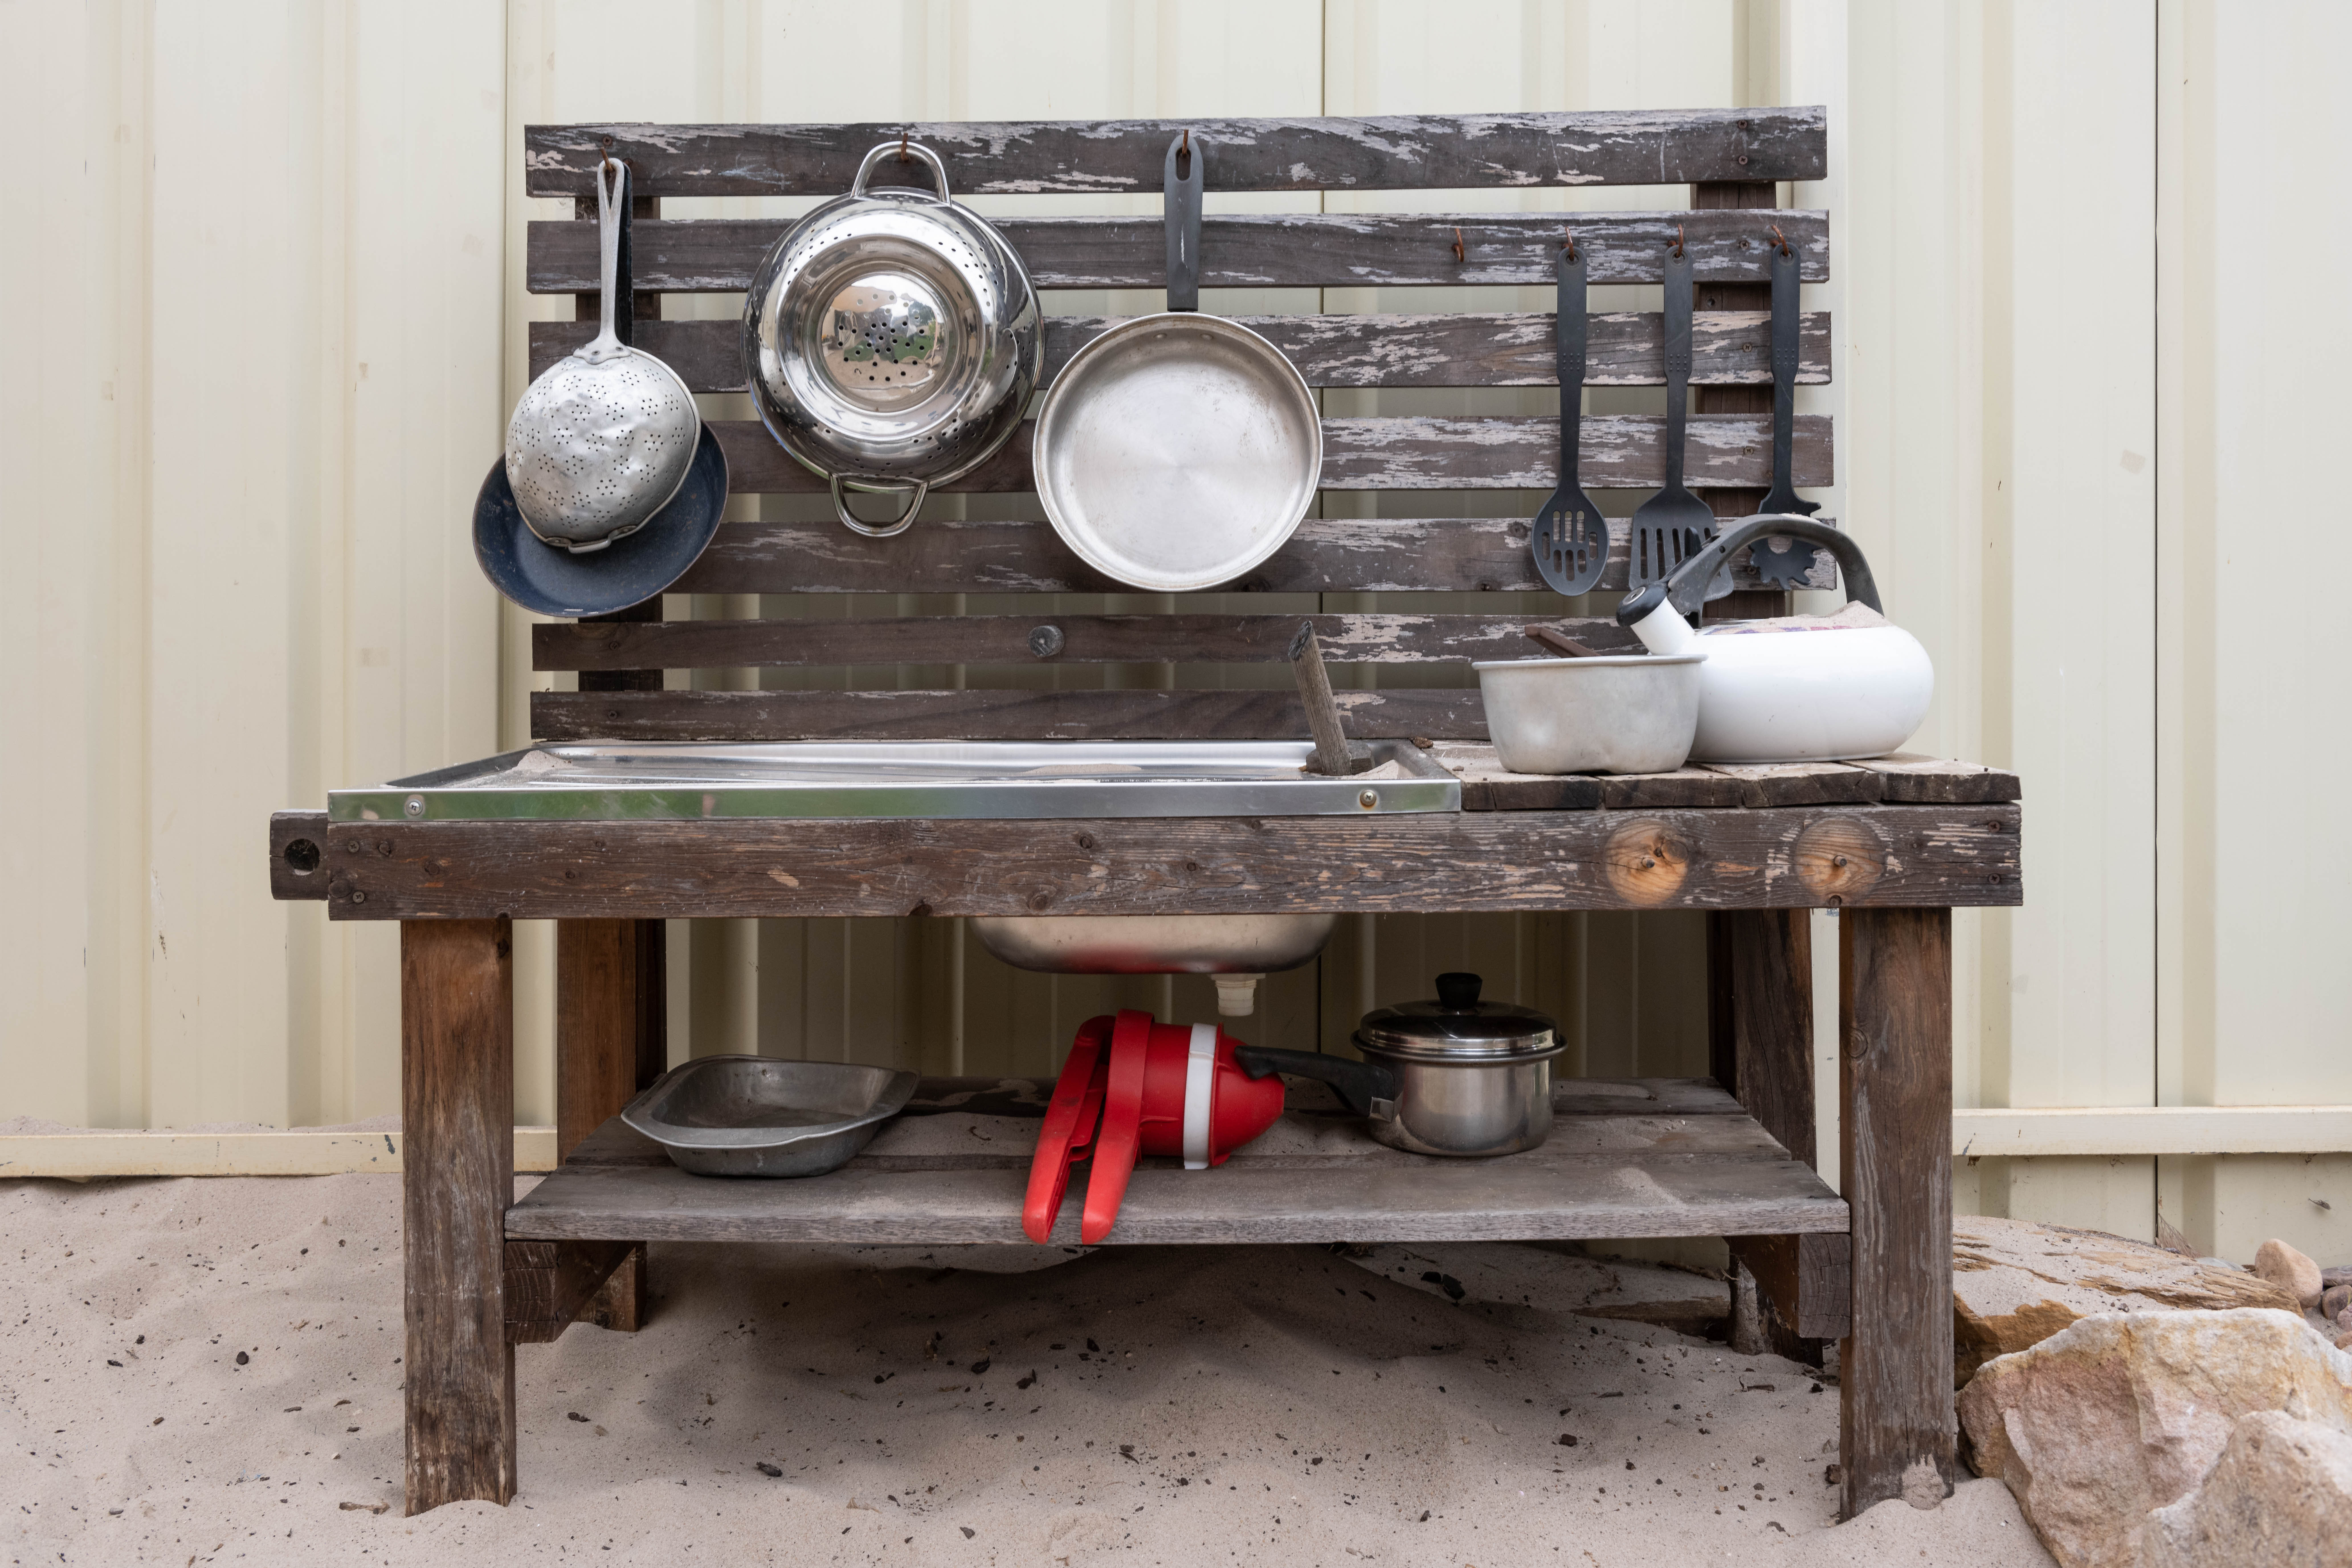 family day care setting – toy mud kitchen